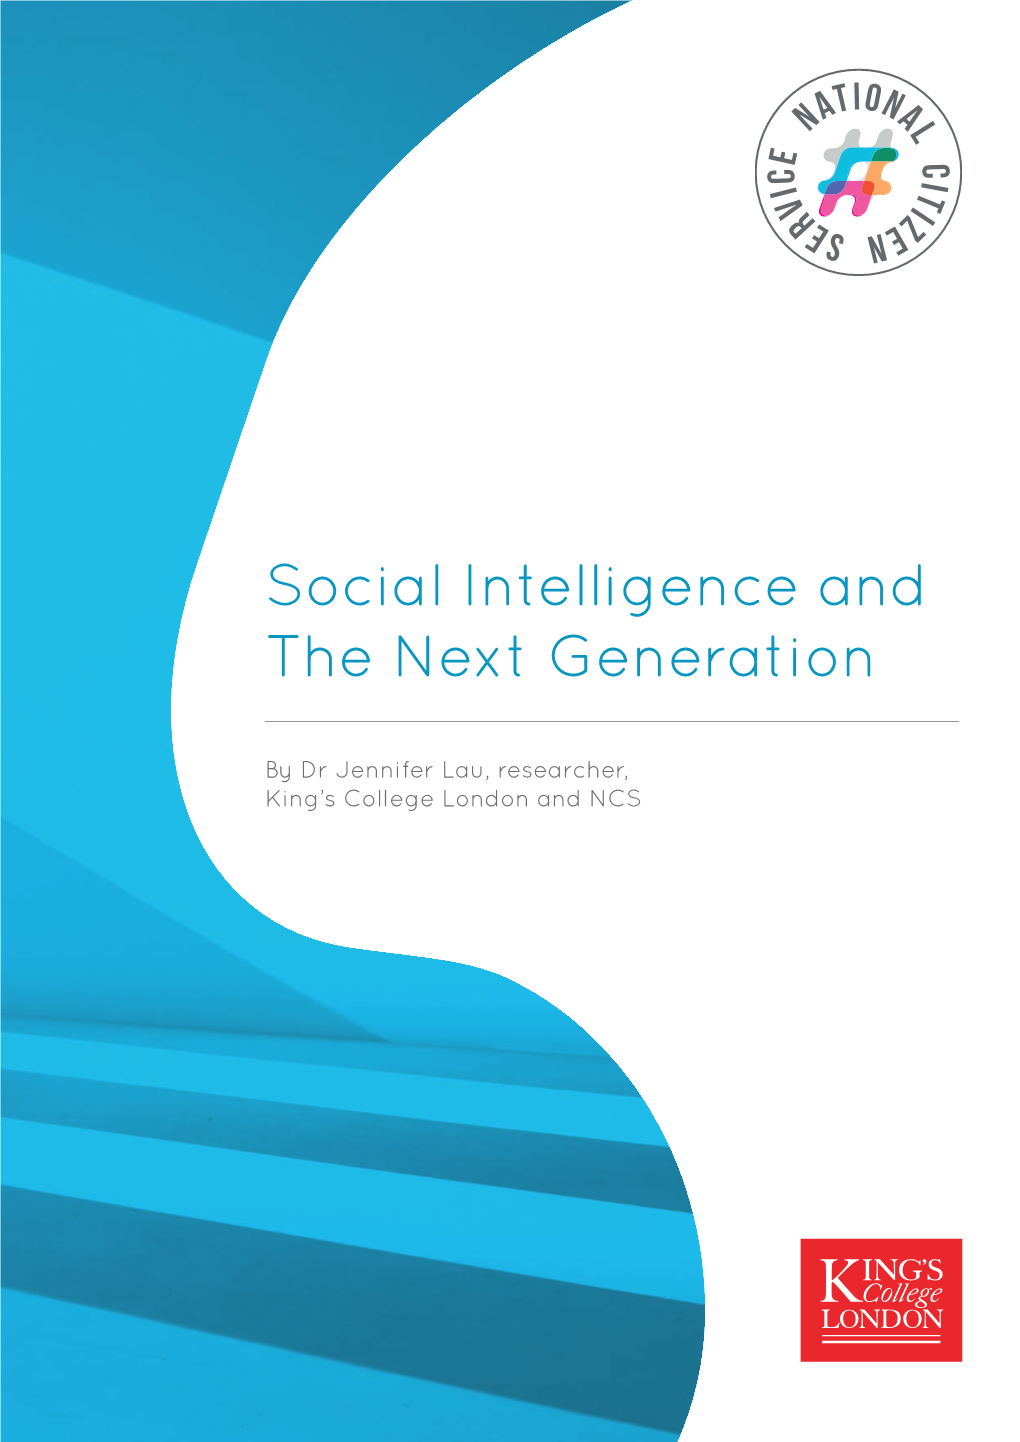 Social Intelligence and the Next Generation